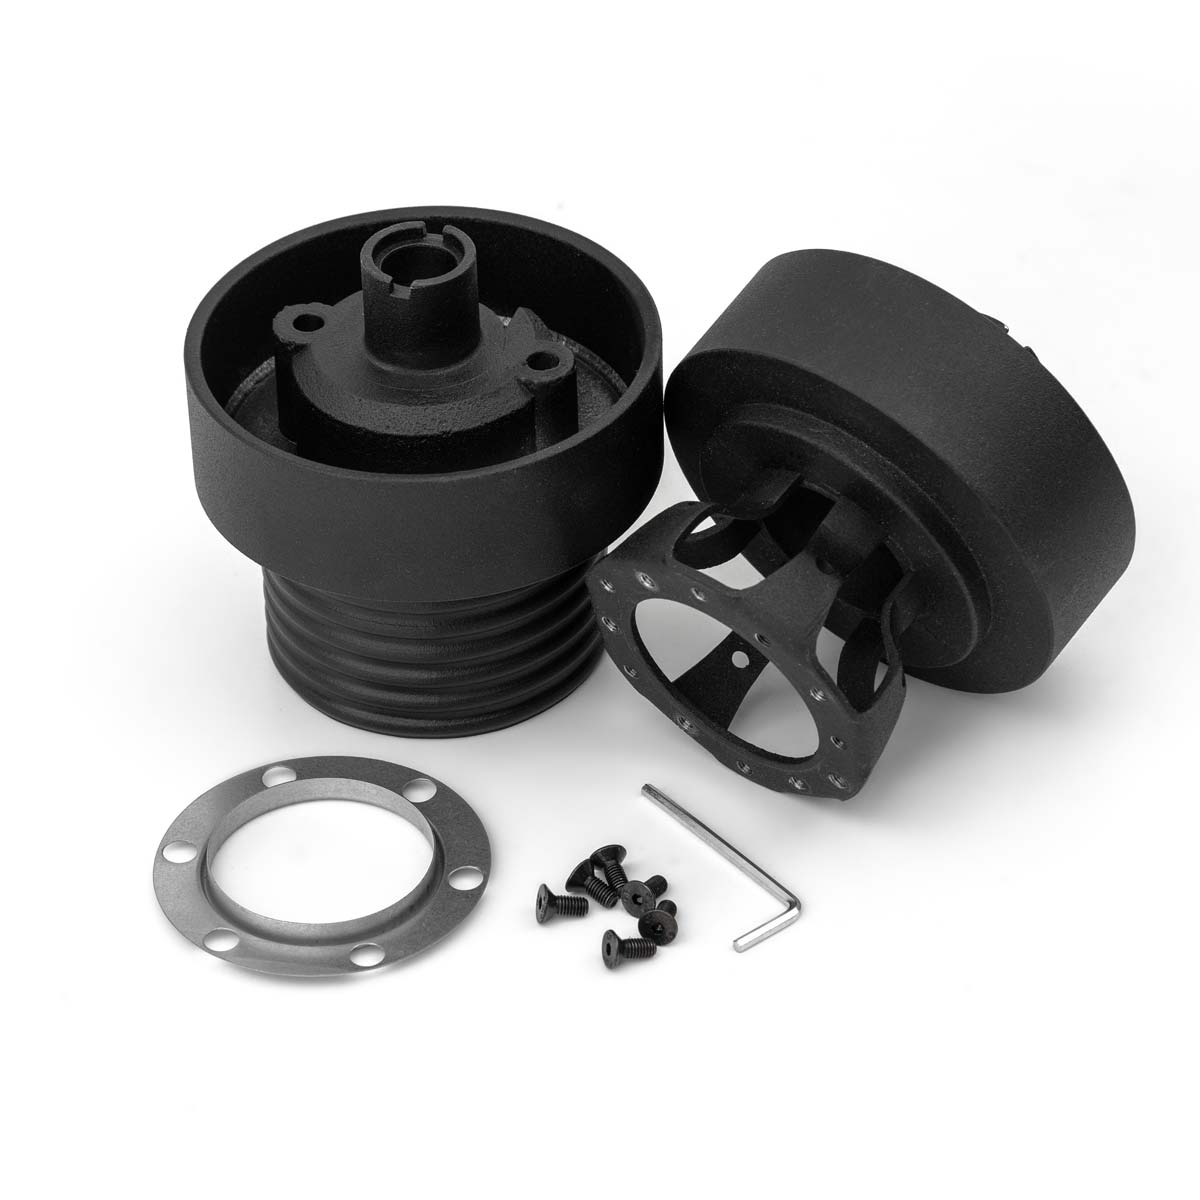 LUISI steering wheel hub VW Polo Coupe (TÜV-compliant deformable / 6x74mm 6x70mm)